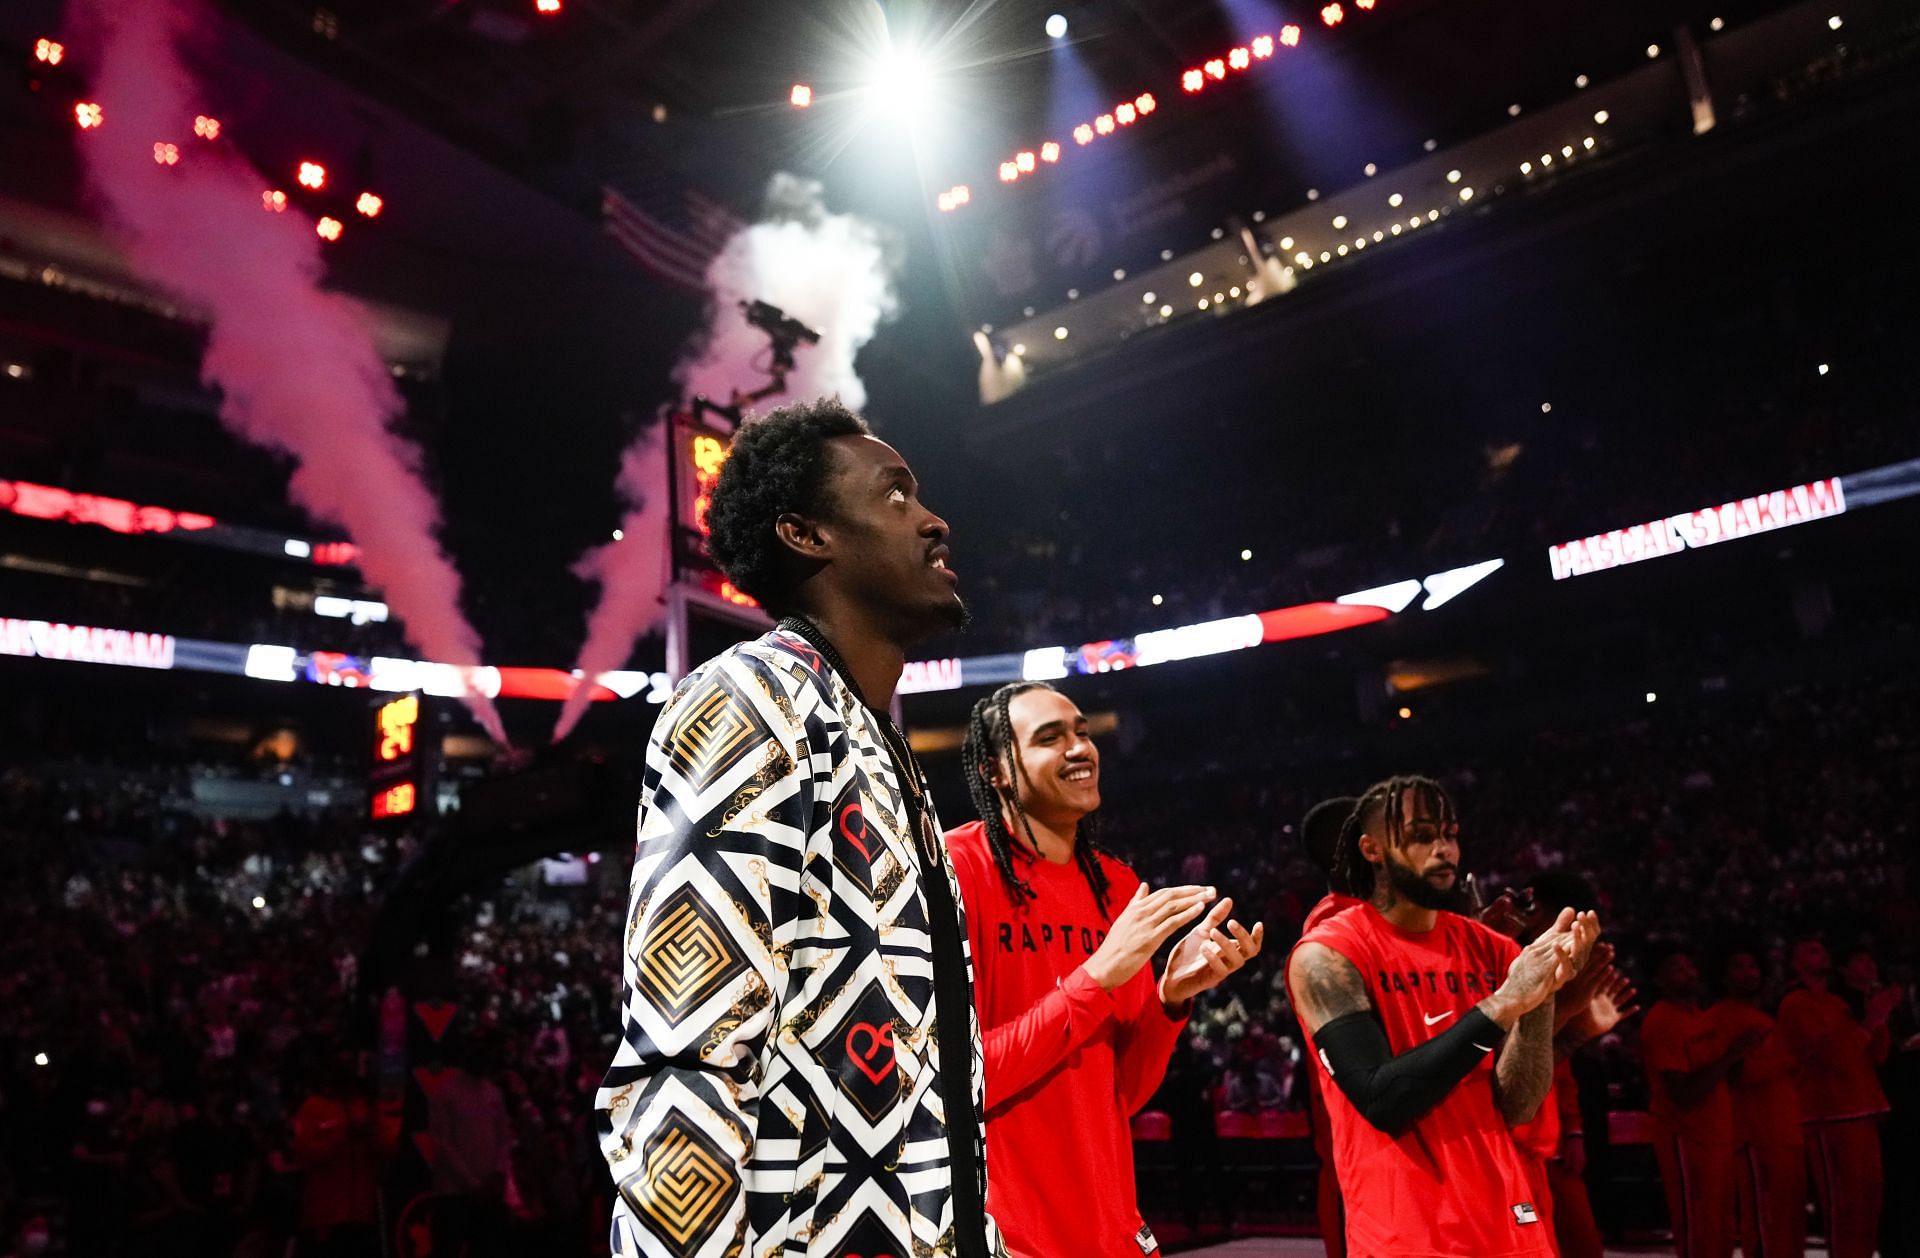 Pascal Siakam #43 of the Toronto Raptors looks on during player introductions for opening night before his team plays the =Washington Wizards during their basketball game at Scotiabank Arena on October 20, 2021 in Toronto, Canada.